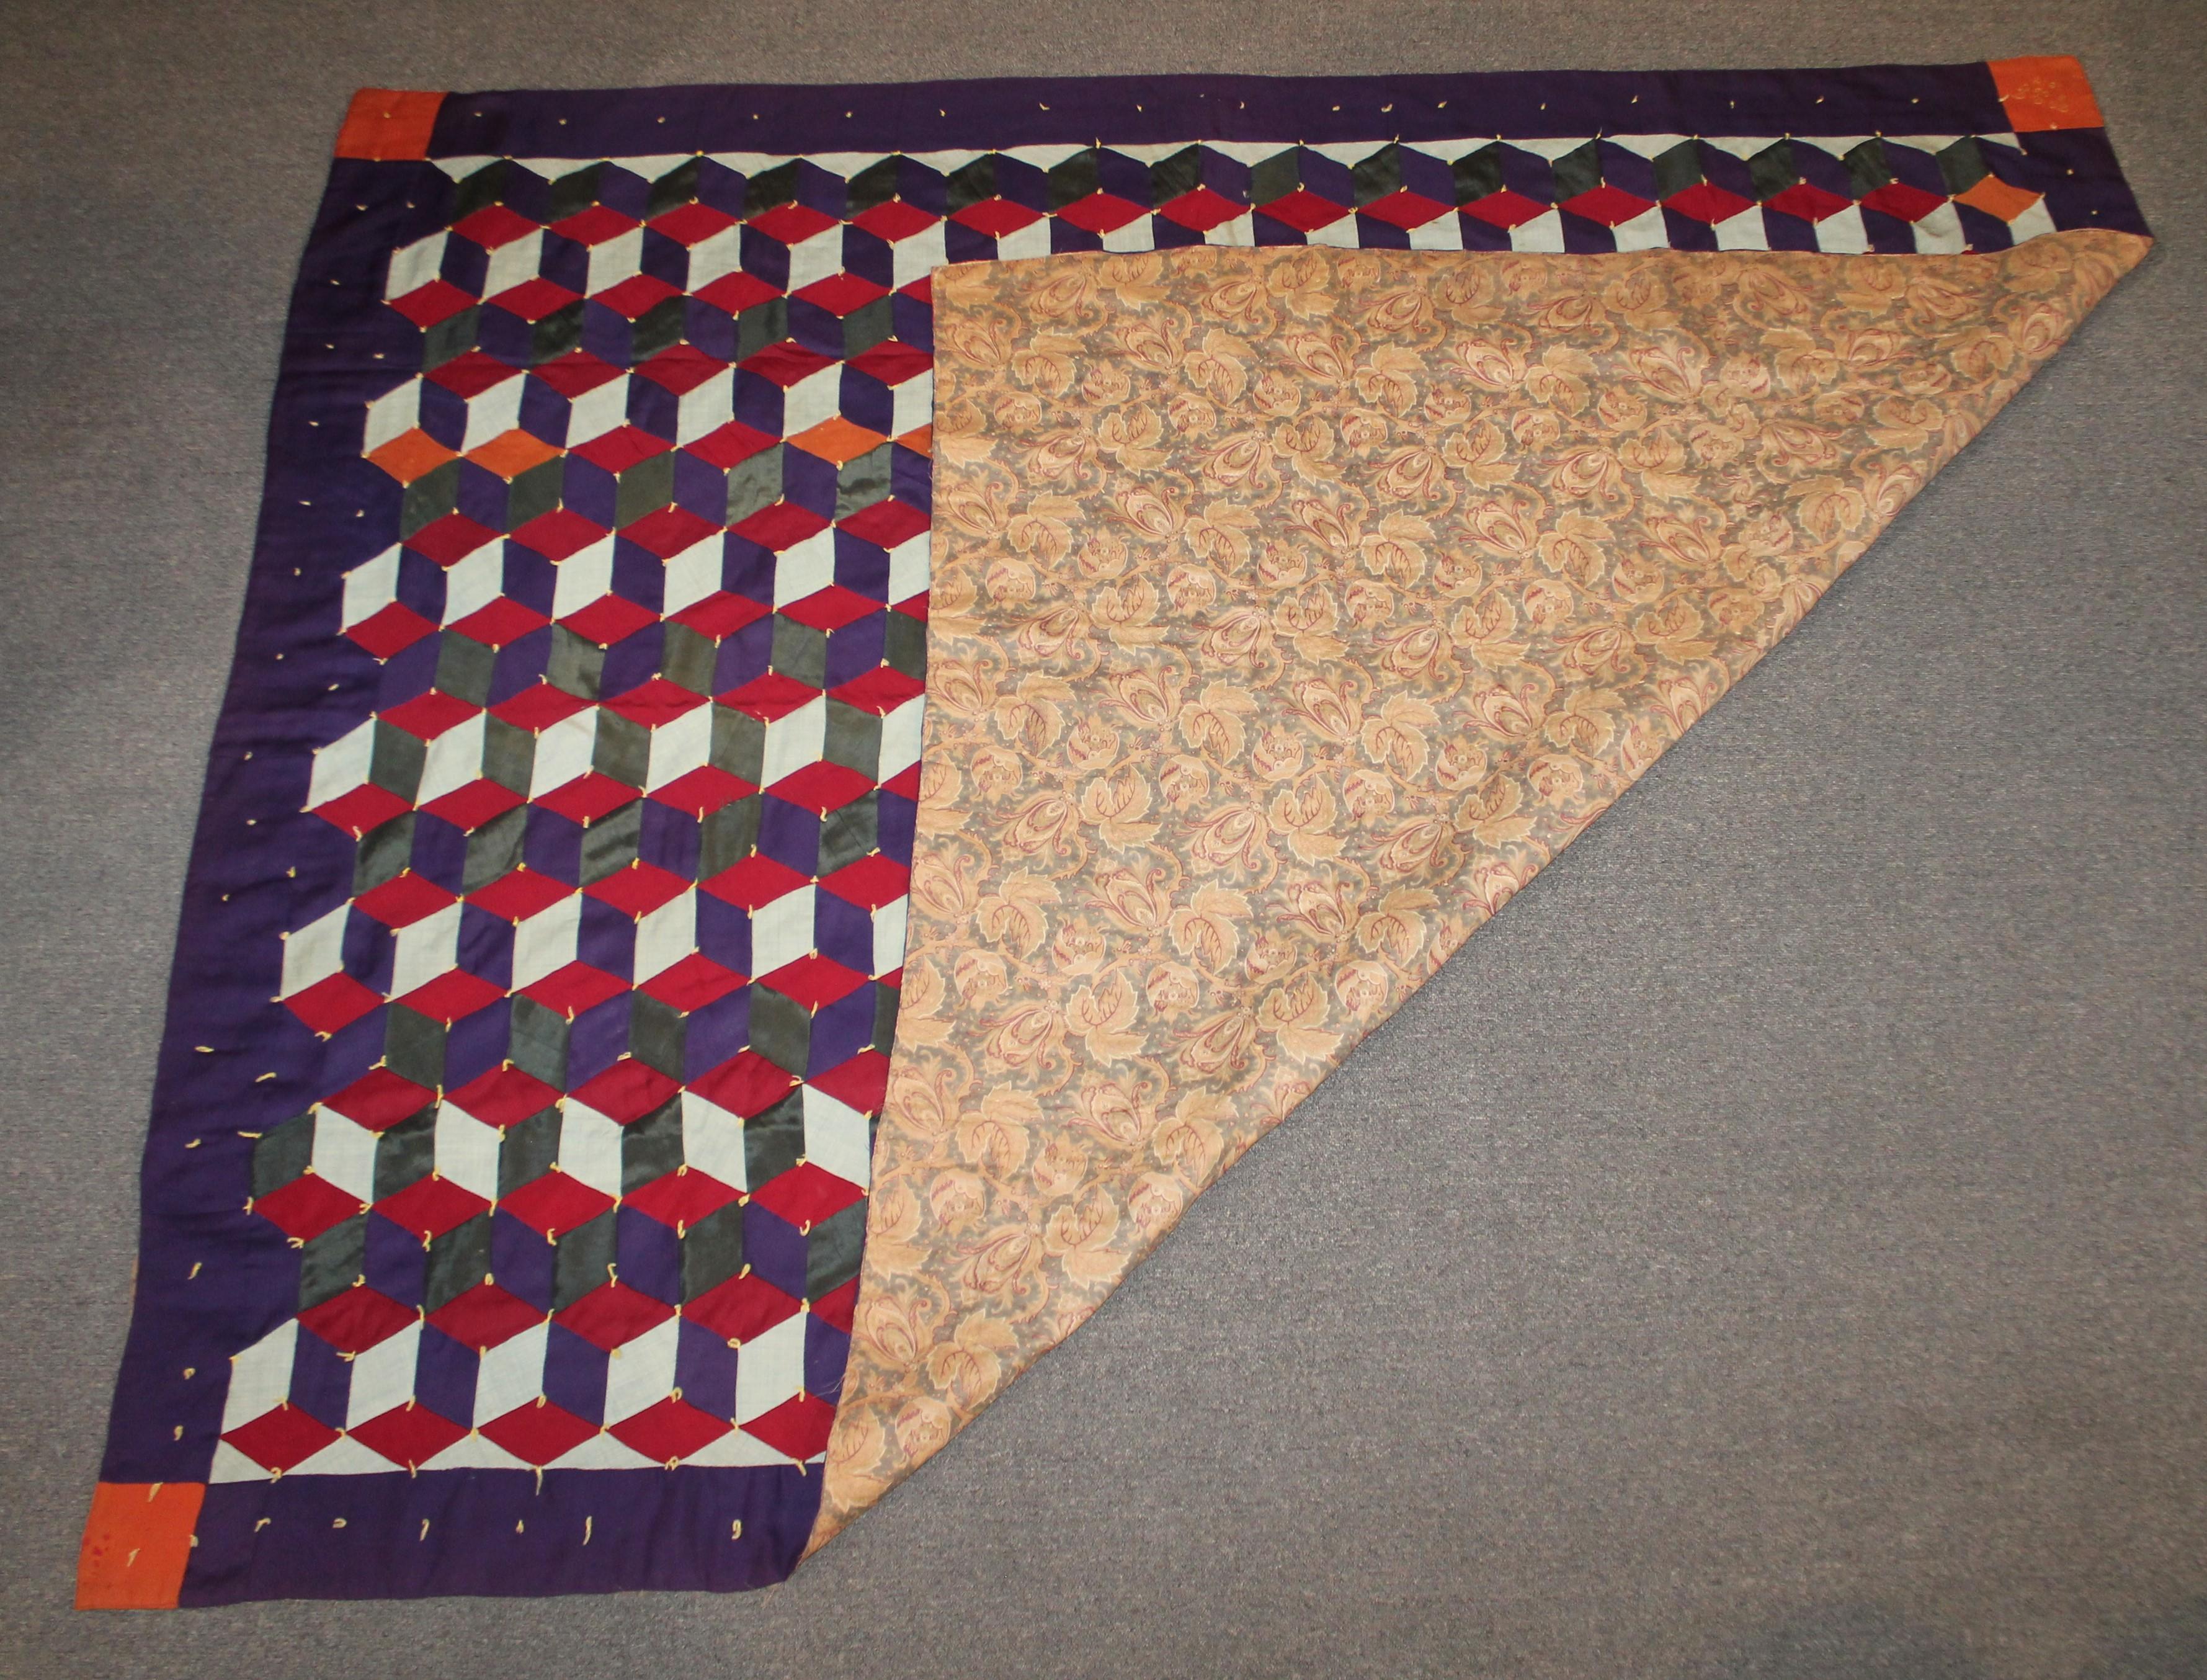 Hand-Crafted Amish Antique Quilt, Wool Tumbling Blocks, Signed WRF 1917